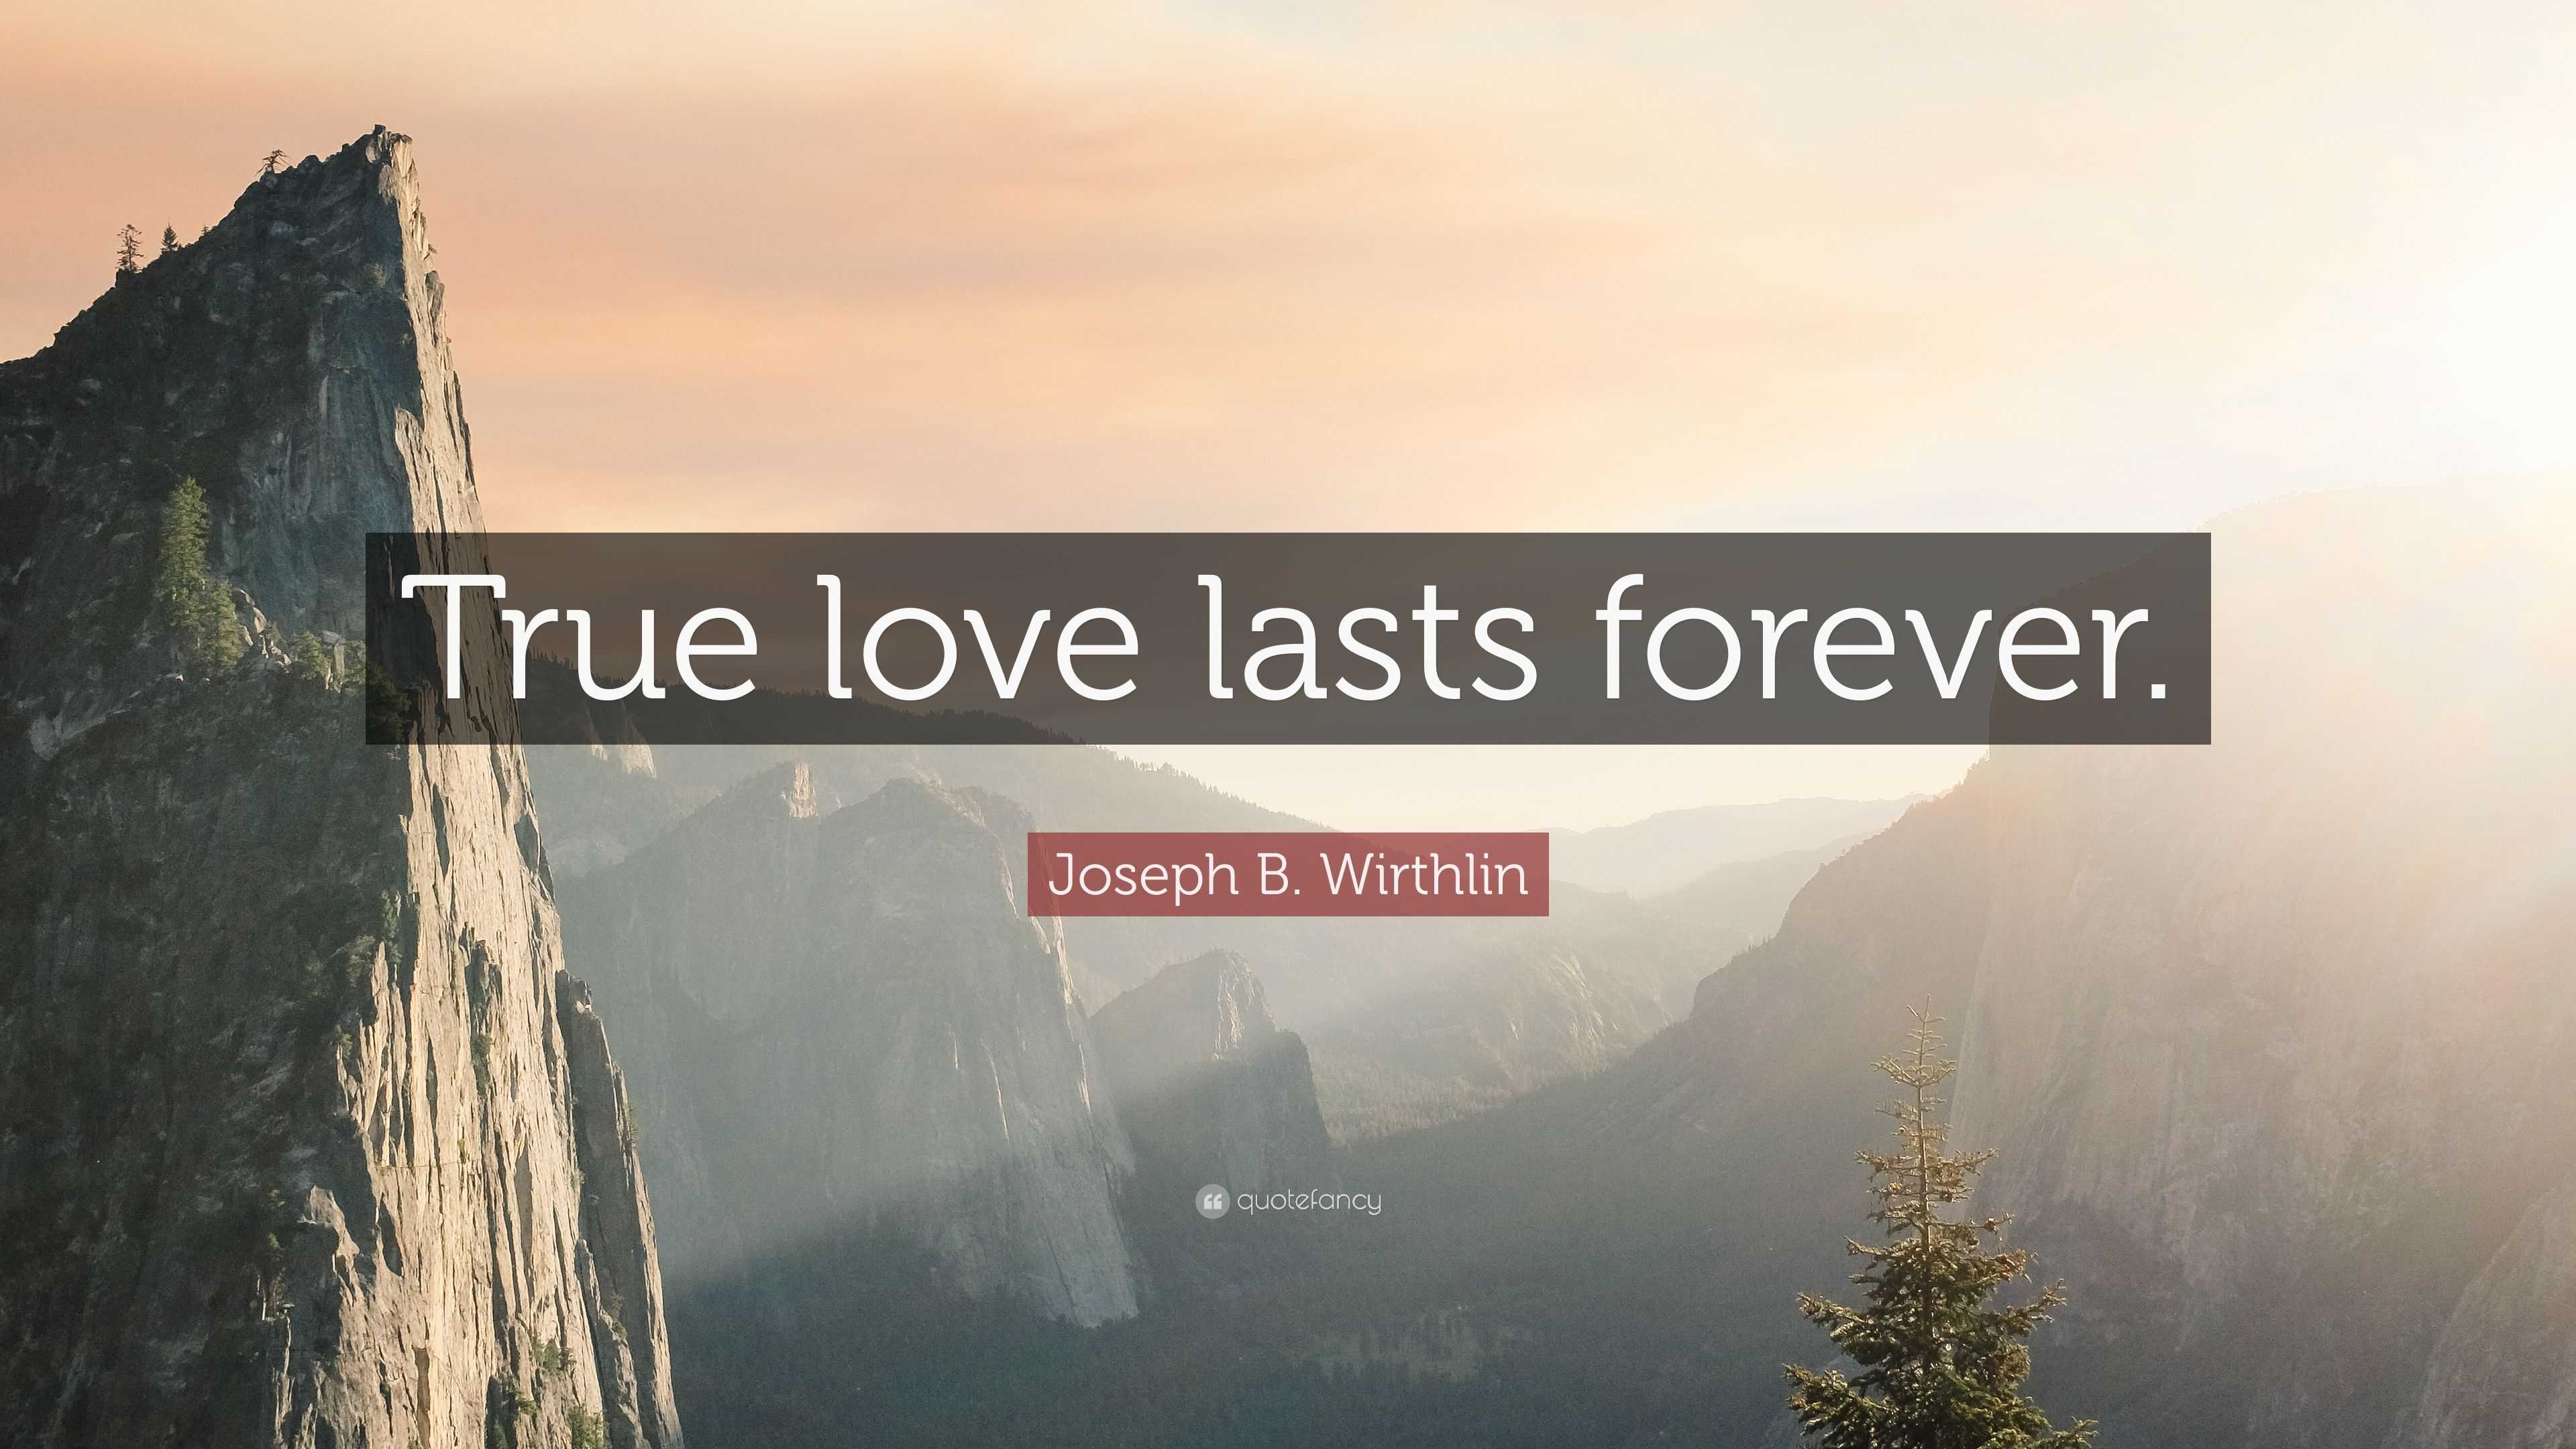 essay about true love lasts forever